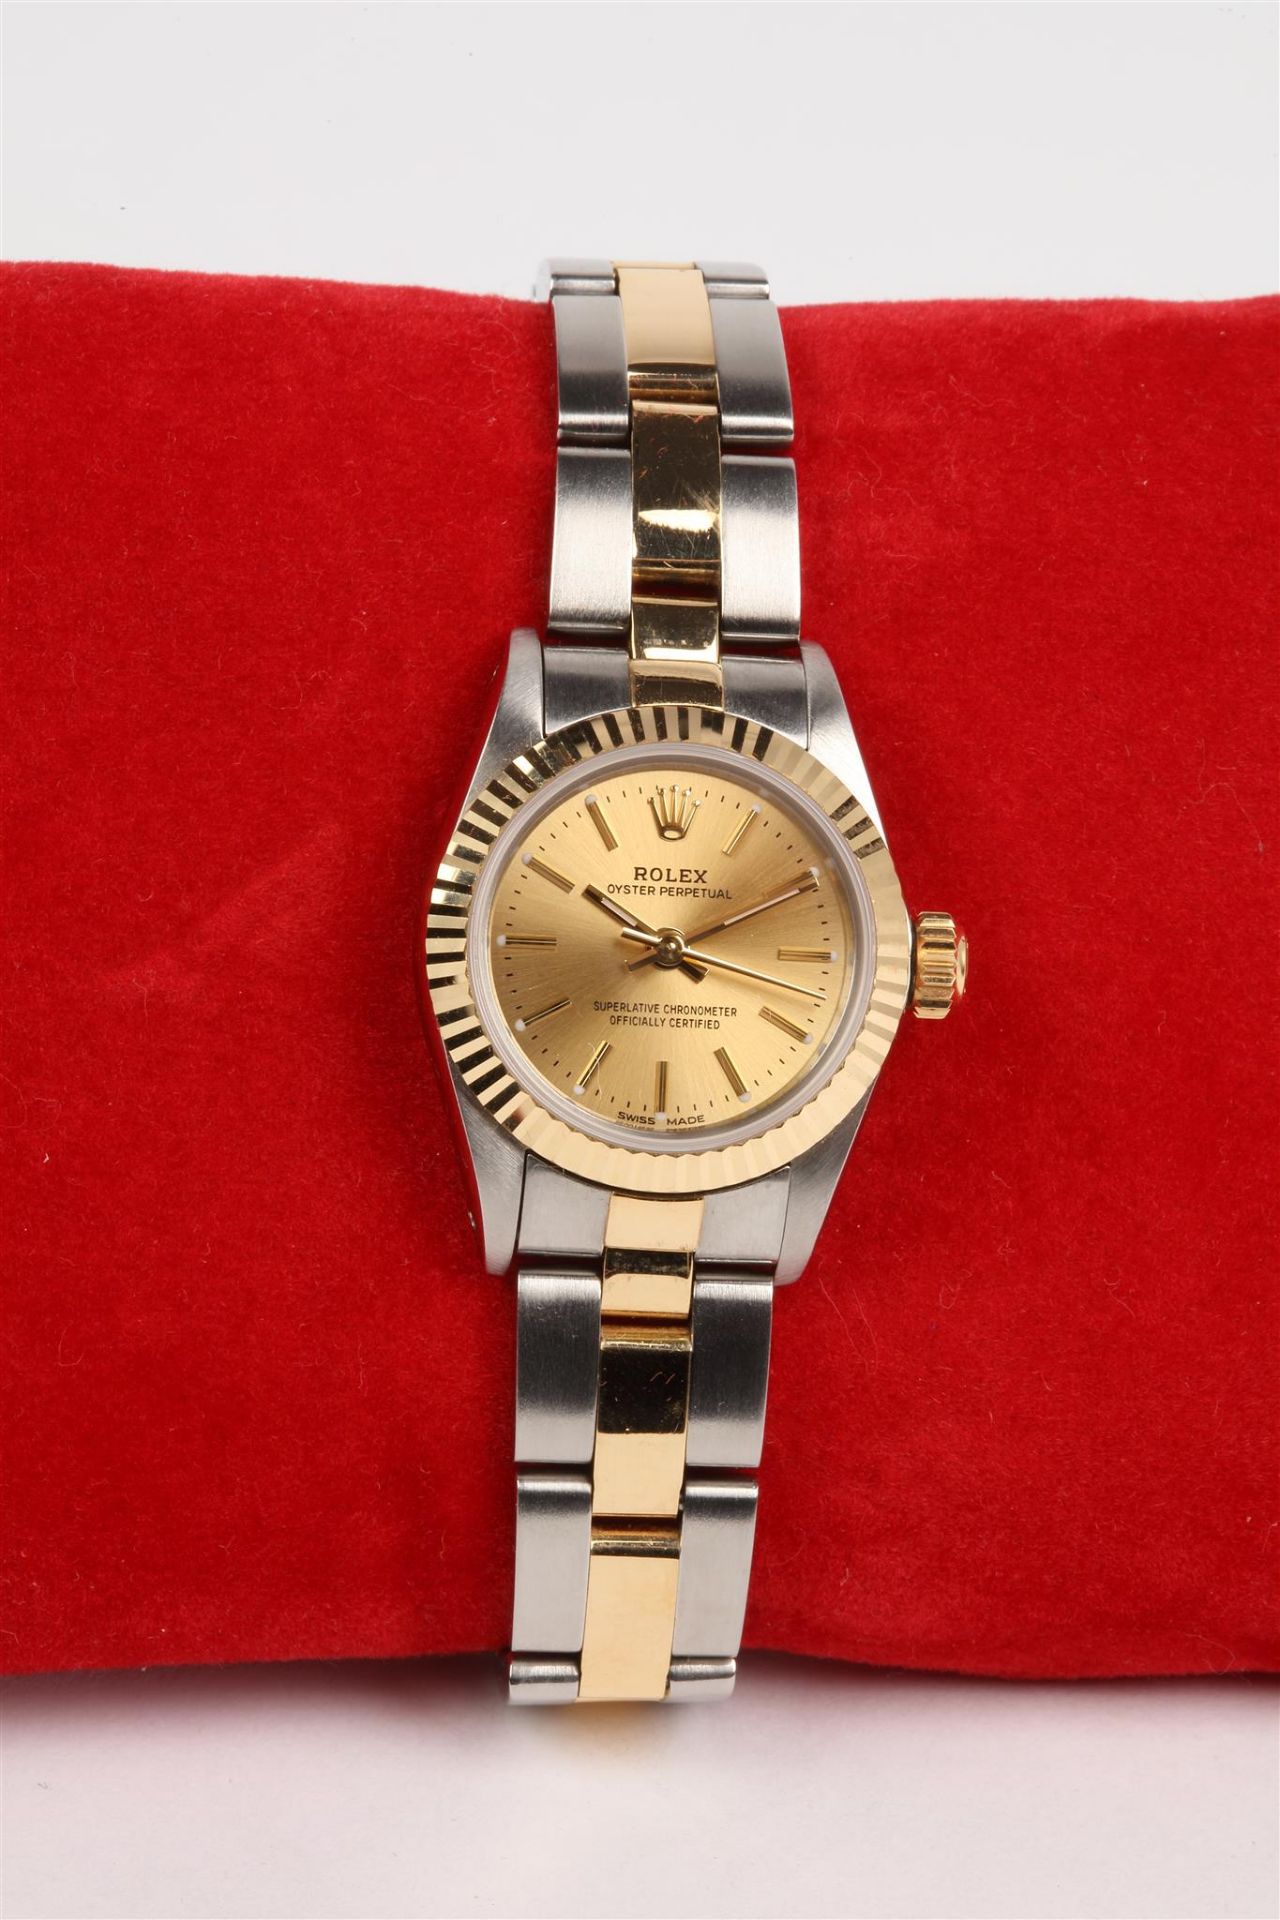 No VAT Ladies Rolex Oyster Perpetual Watch - Model 67193 - Gold & Stainless Steel Strap With Gold